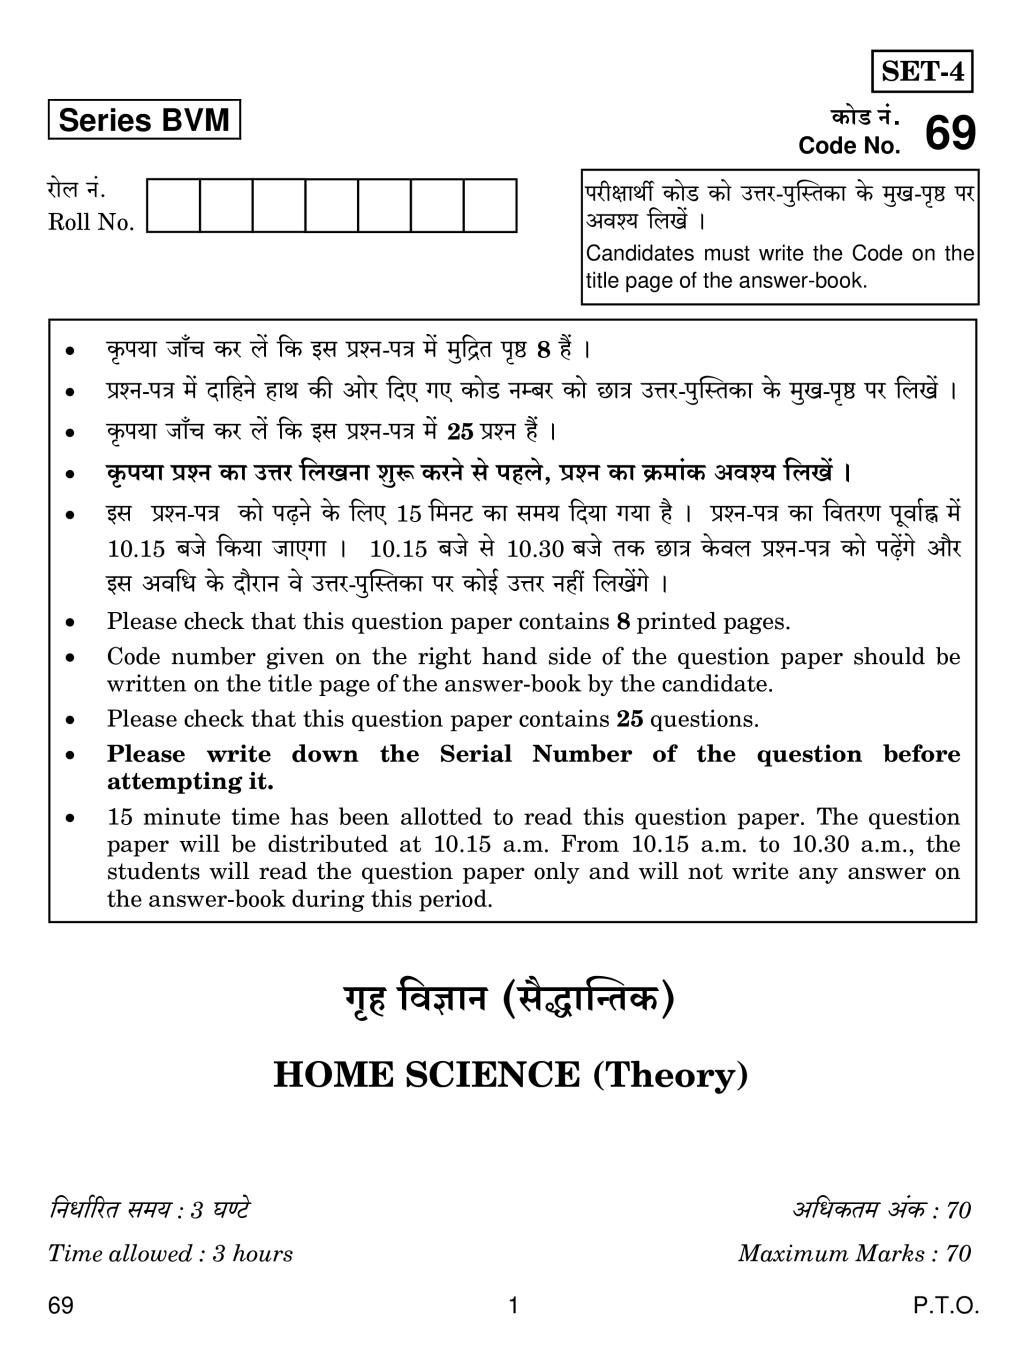 CBSE Class 12 Home Science Question Paper 2019 - Page 1